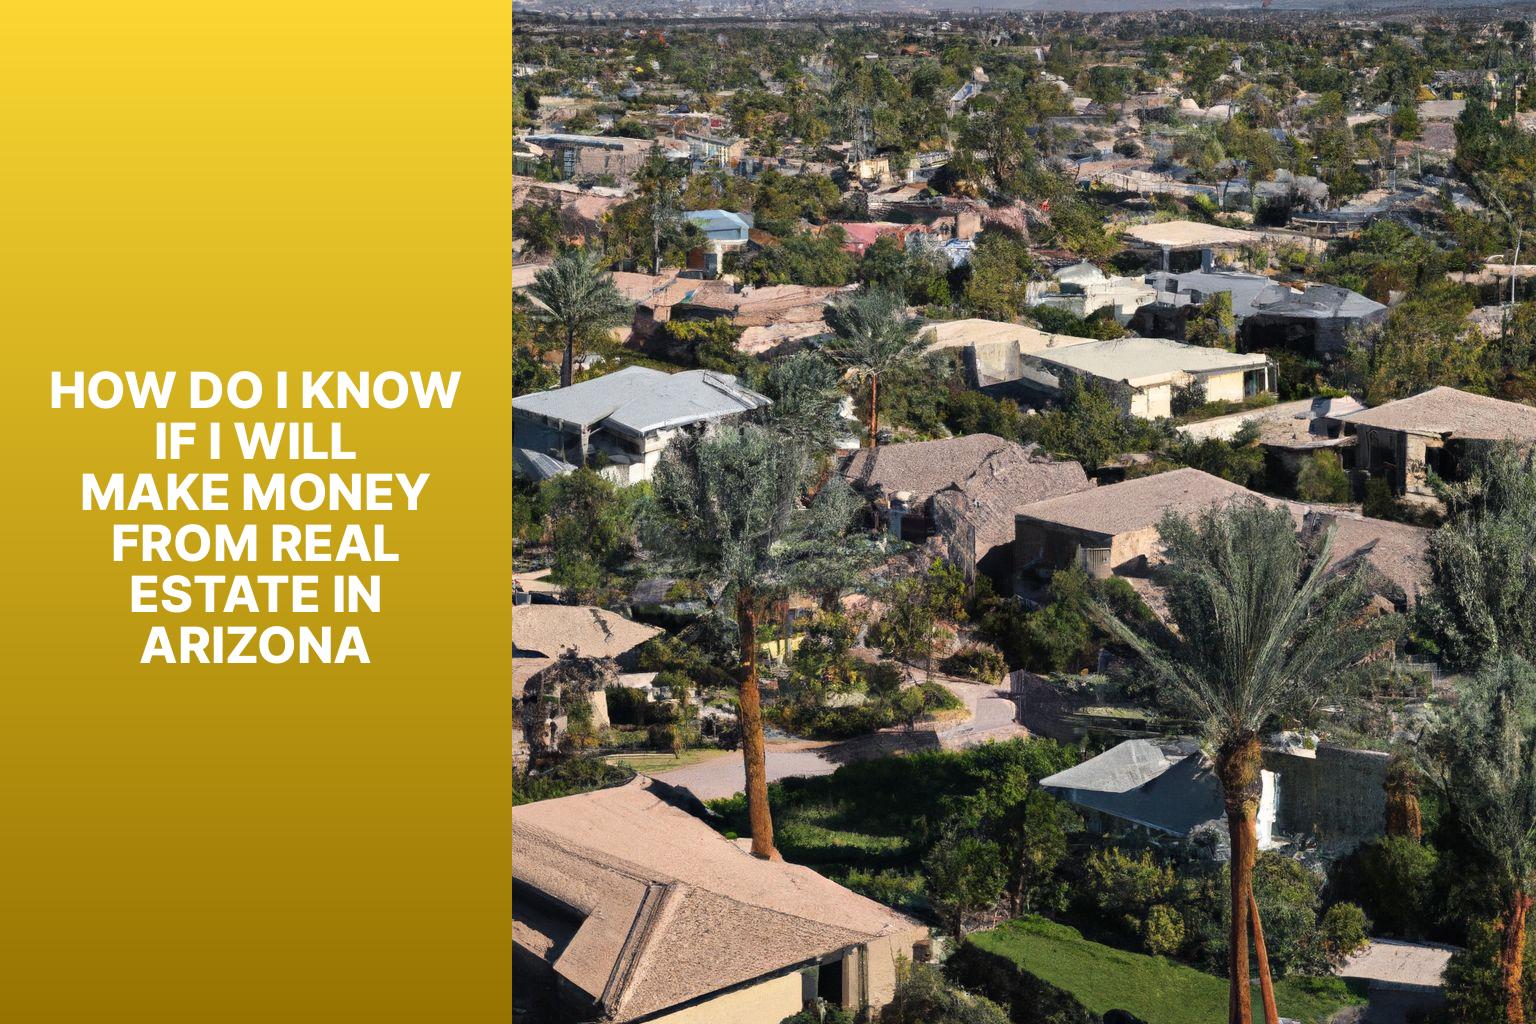 How do I know if I will make money from real estate in Arizona